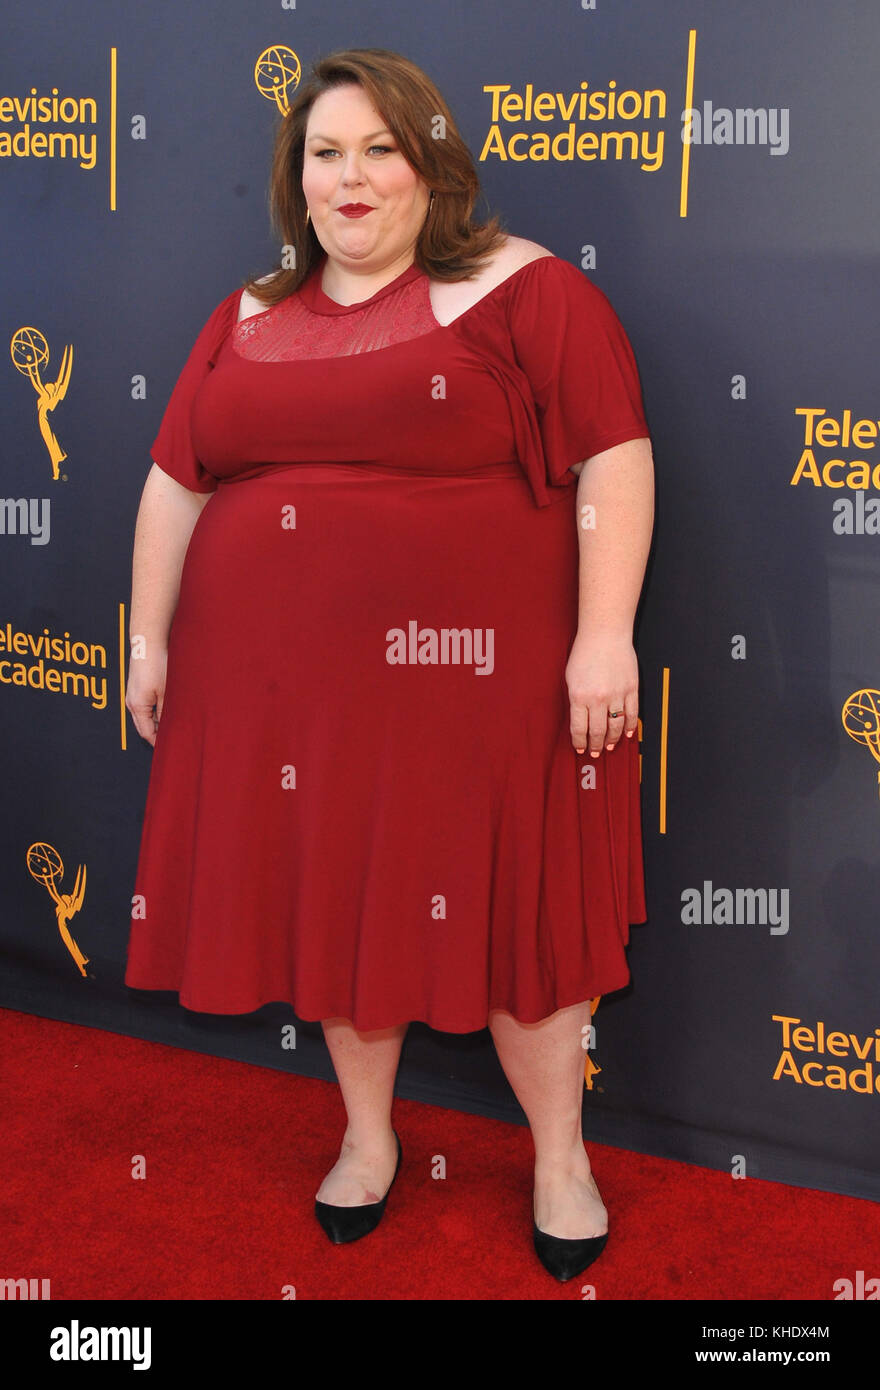 NORTH HOLLYWOOD, CA - JUNE 29: Chrissy Metz attends the Television ...